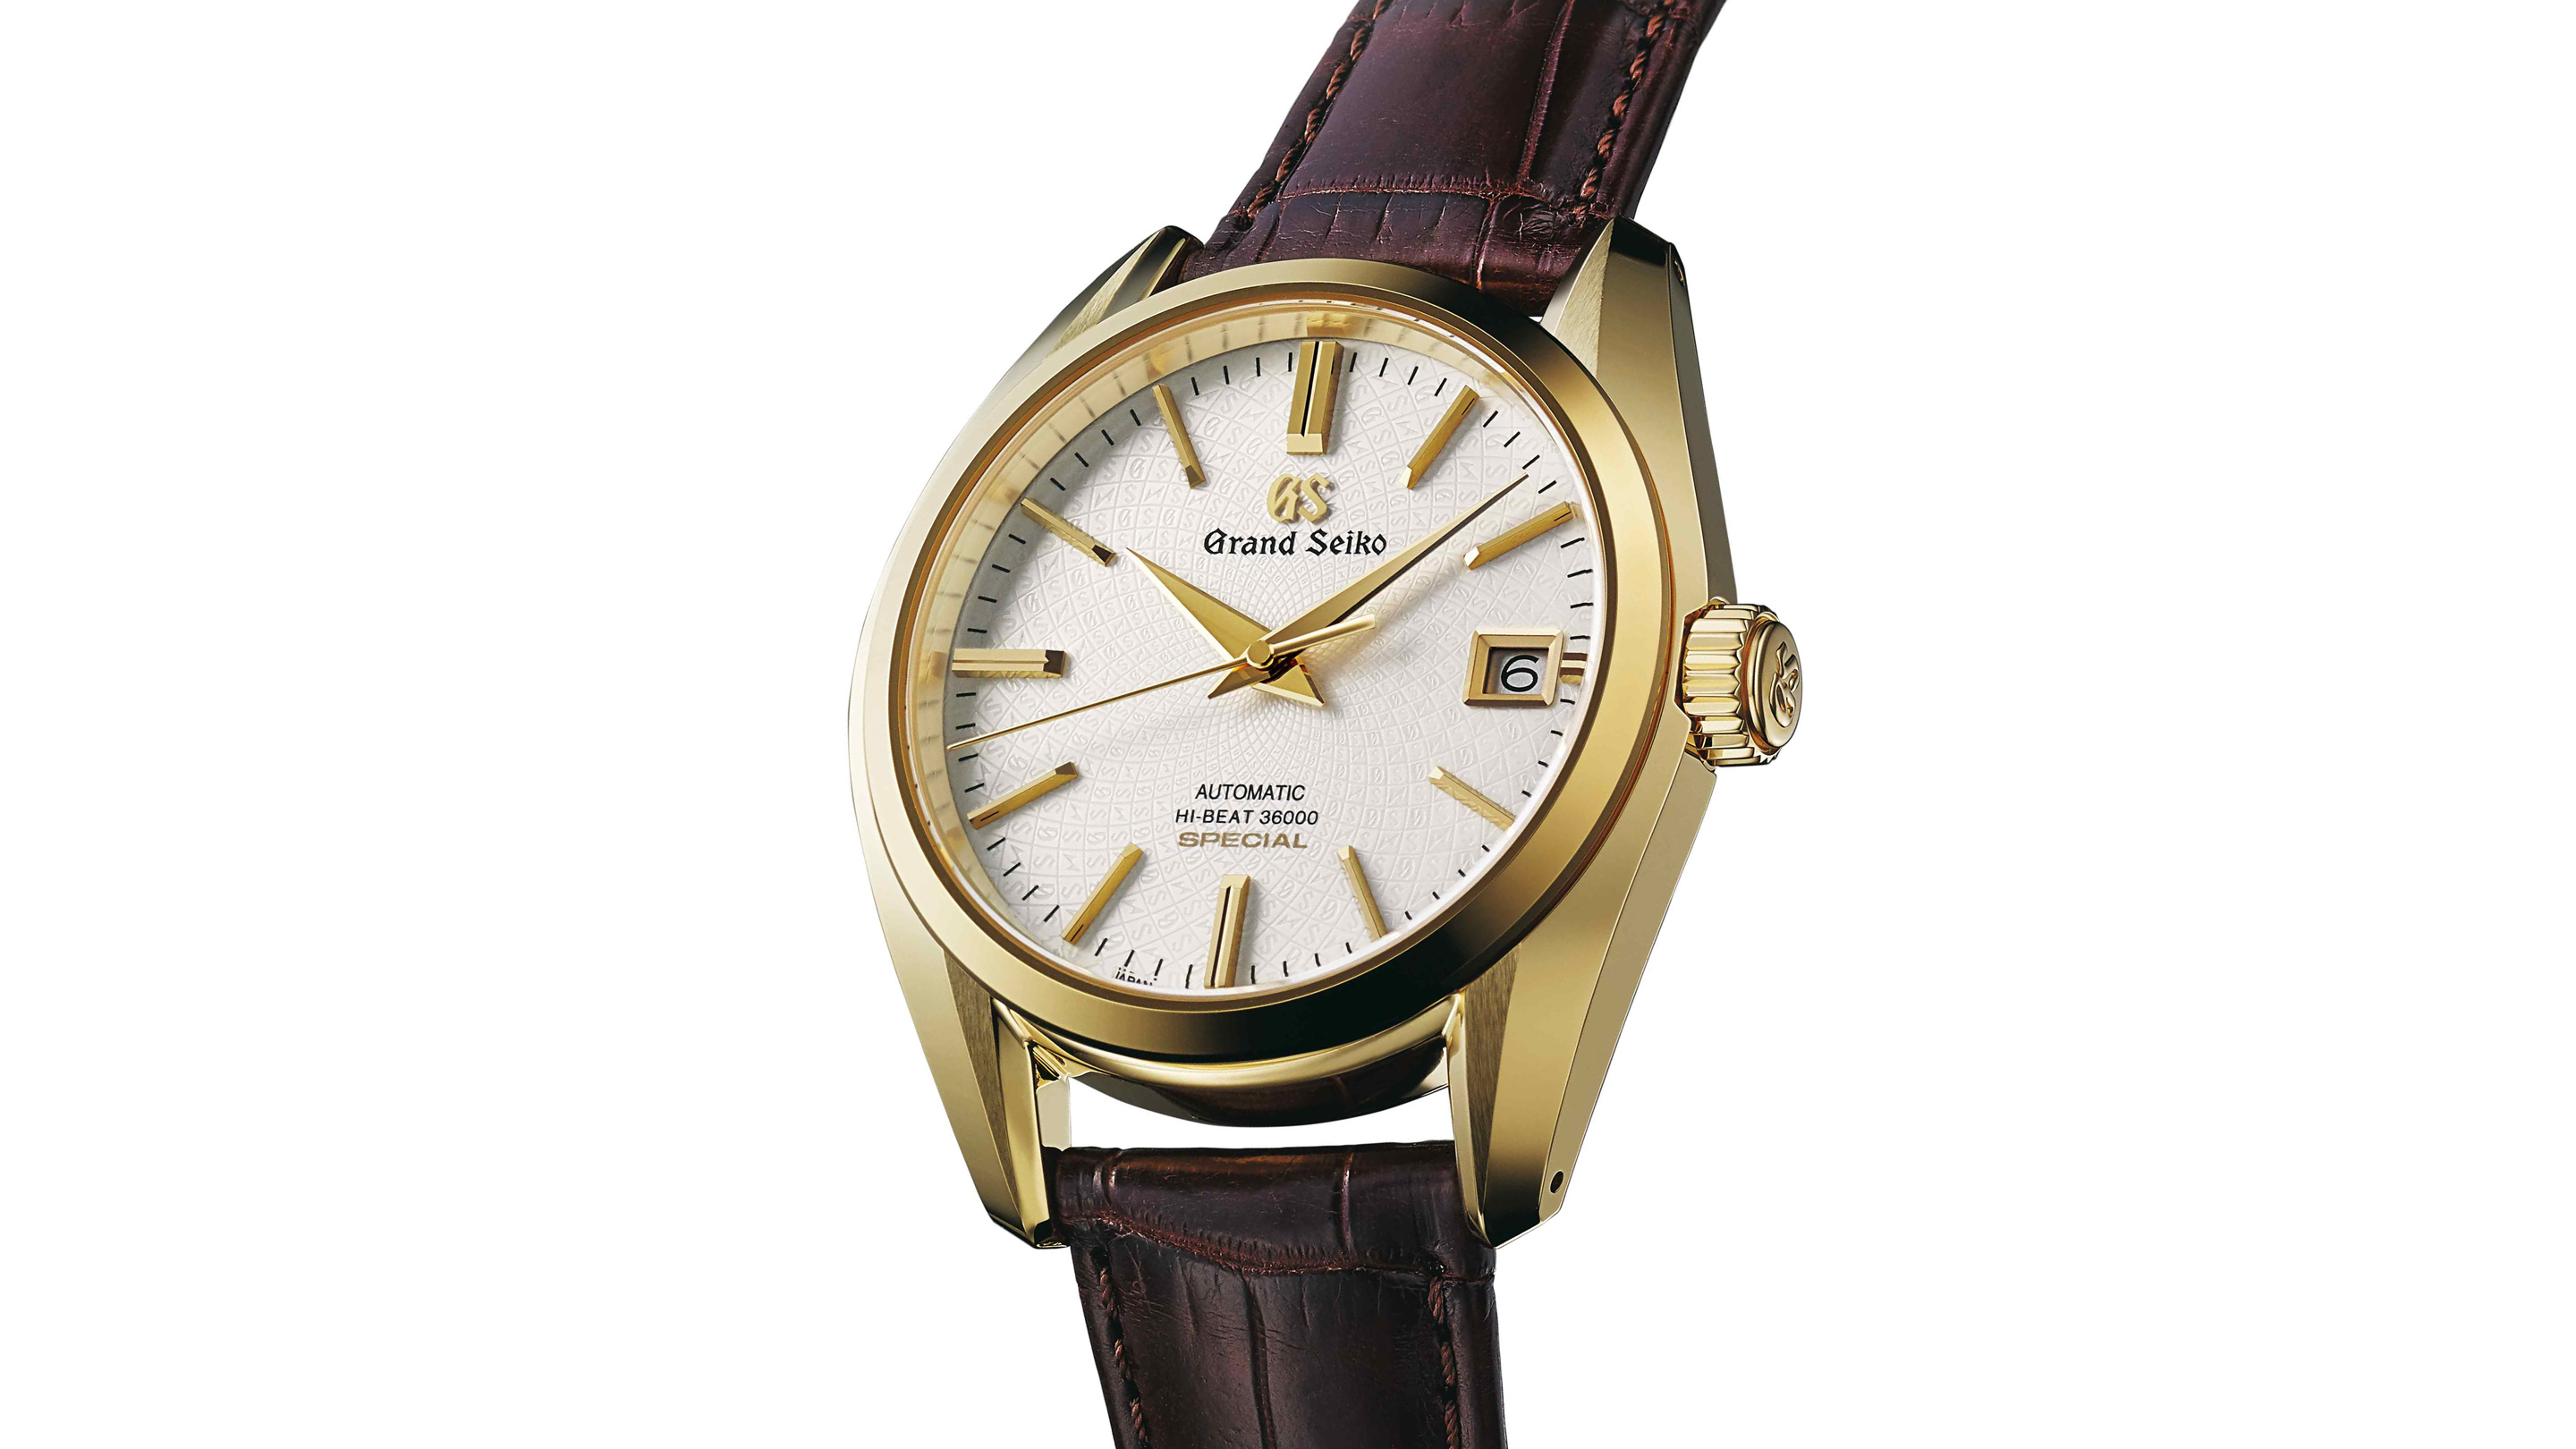 Introducing: The Grand Seiko Hi-Beat 36000 'Special' SBGH266 For 